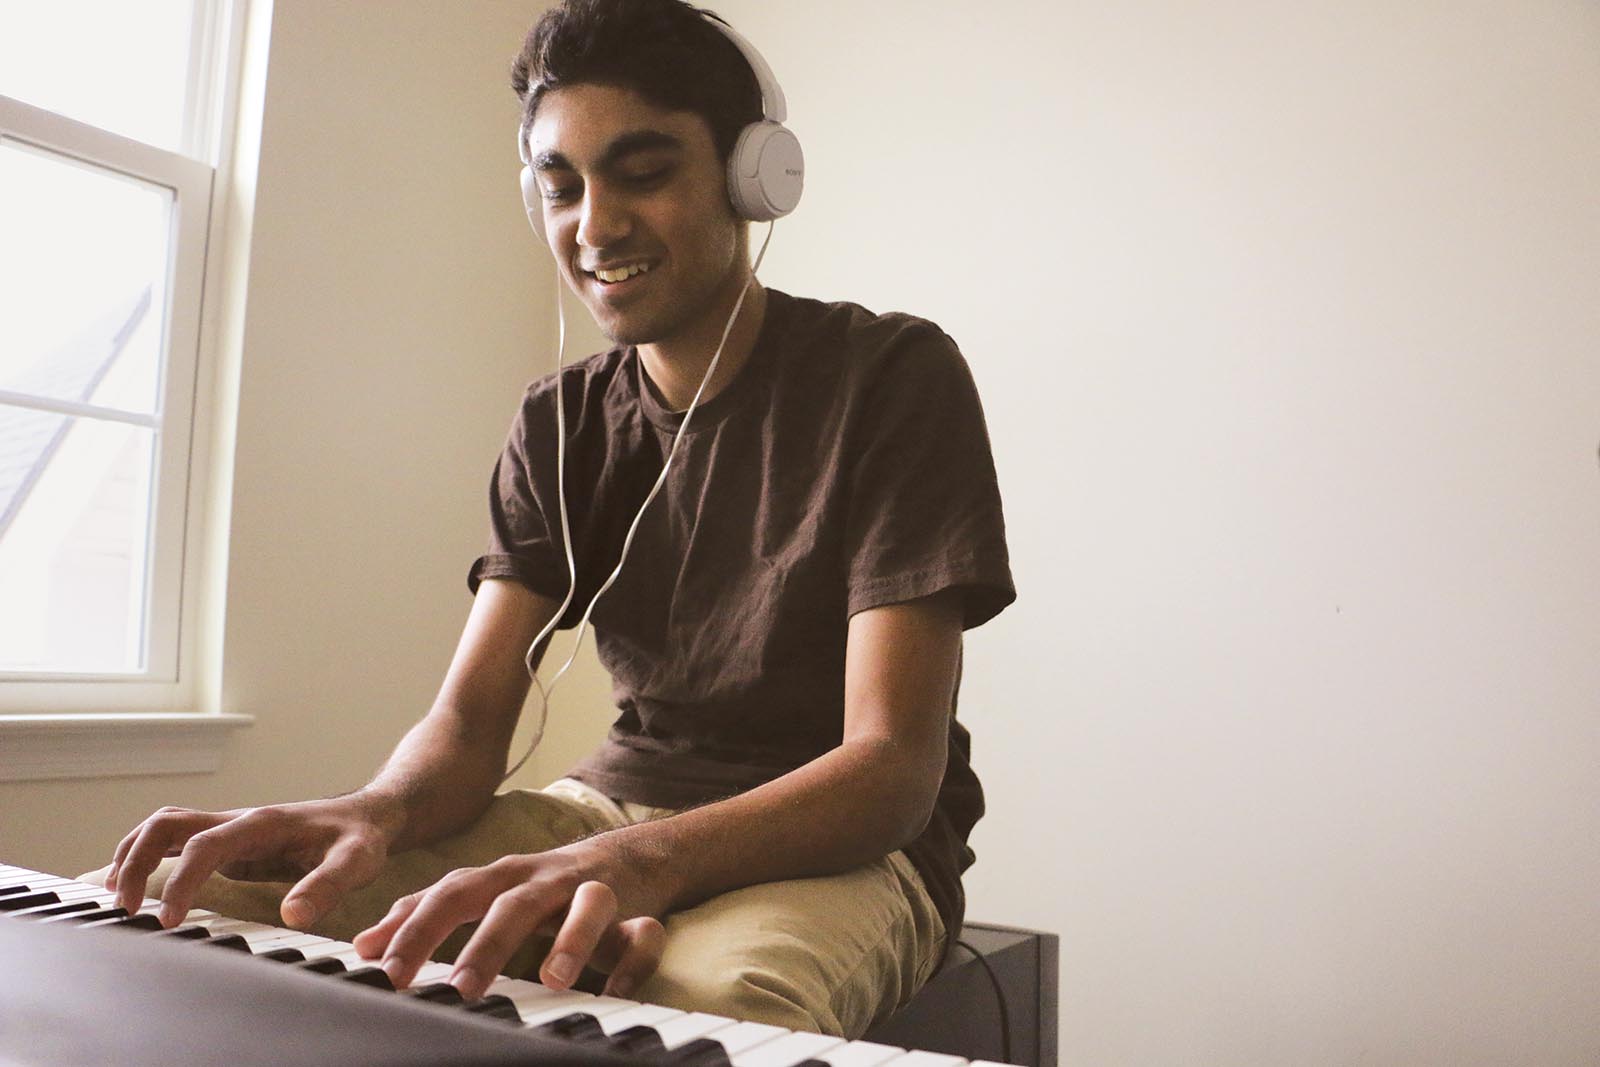 Magesh plays piano while wearing headphones.